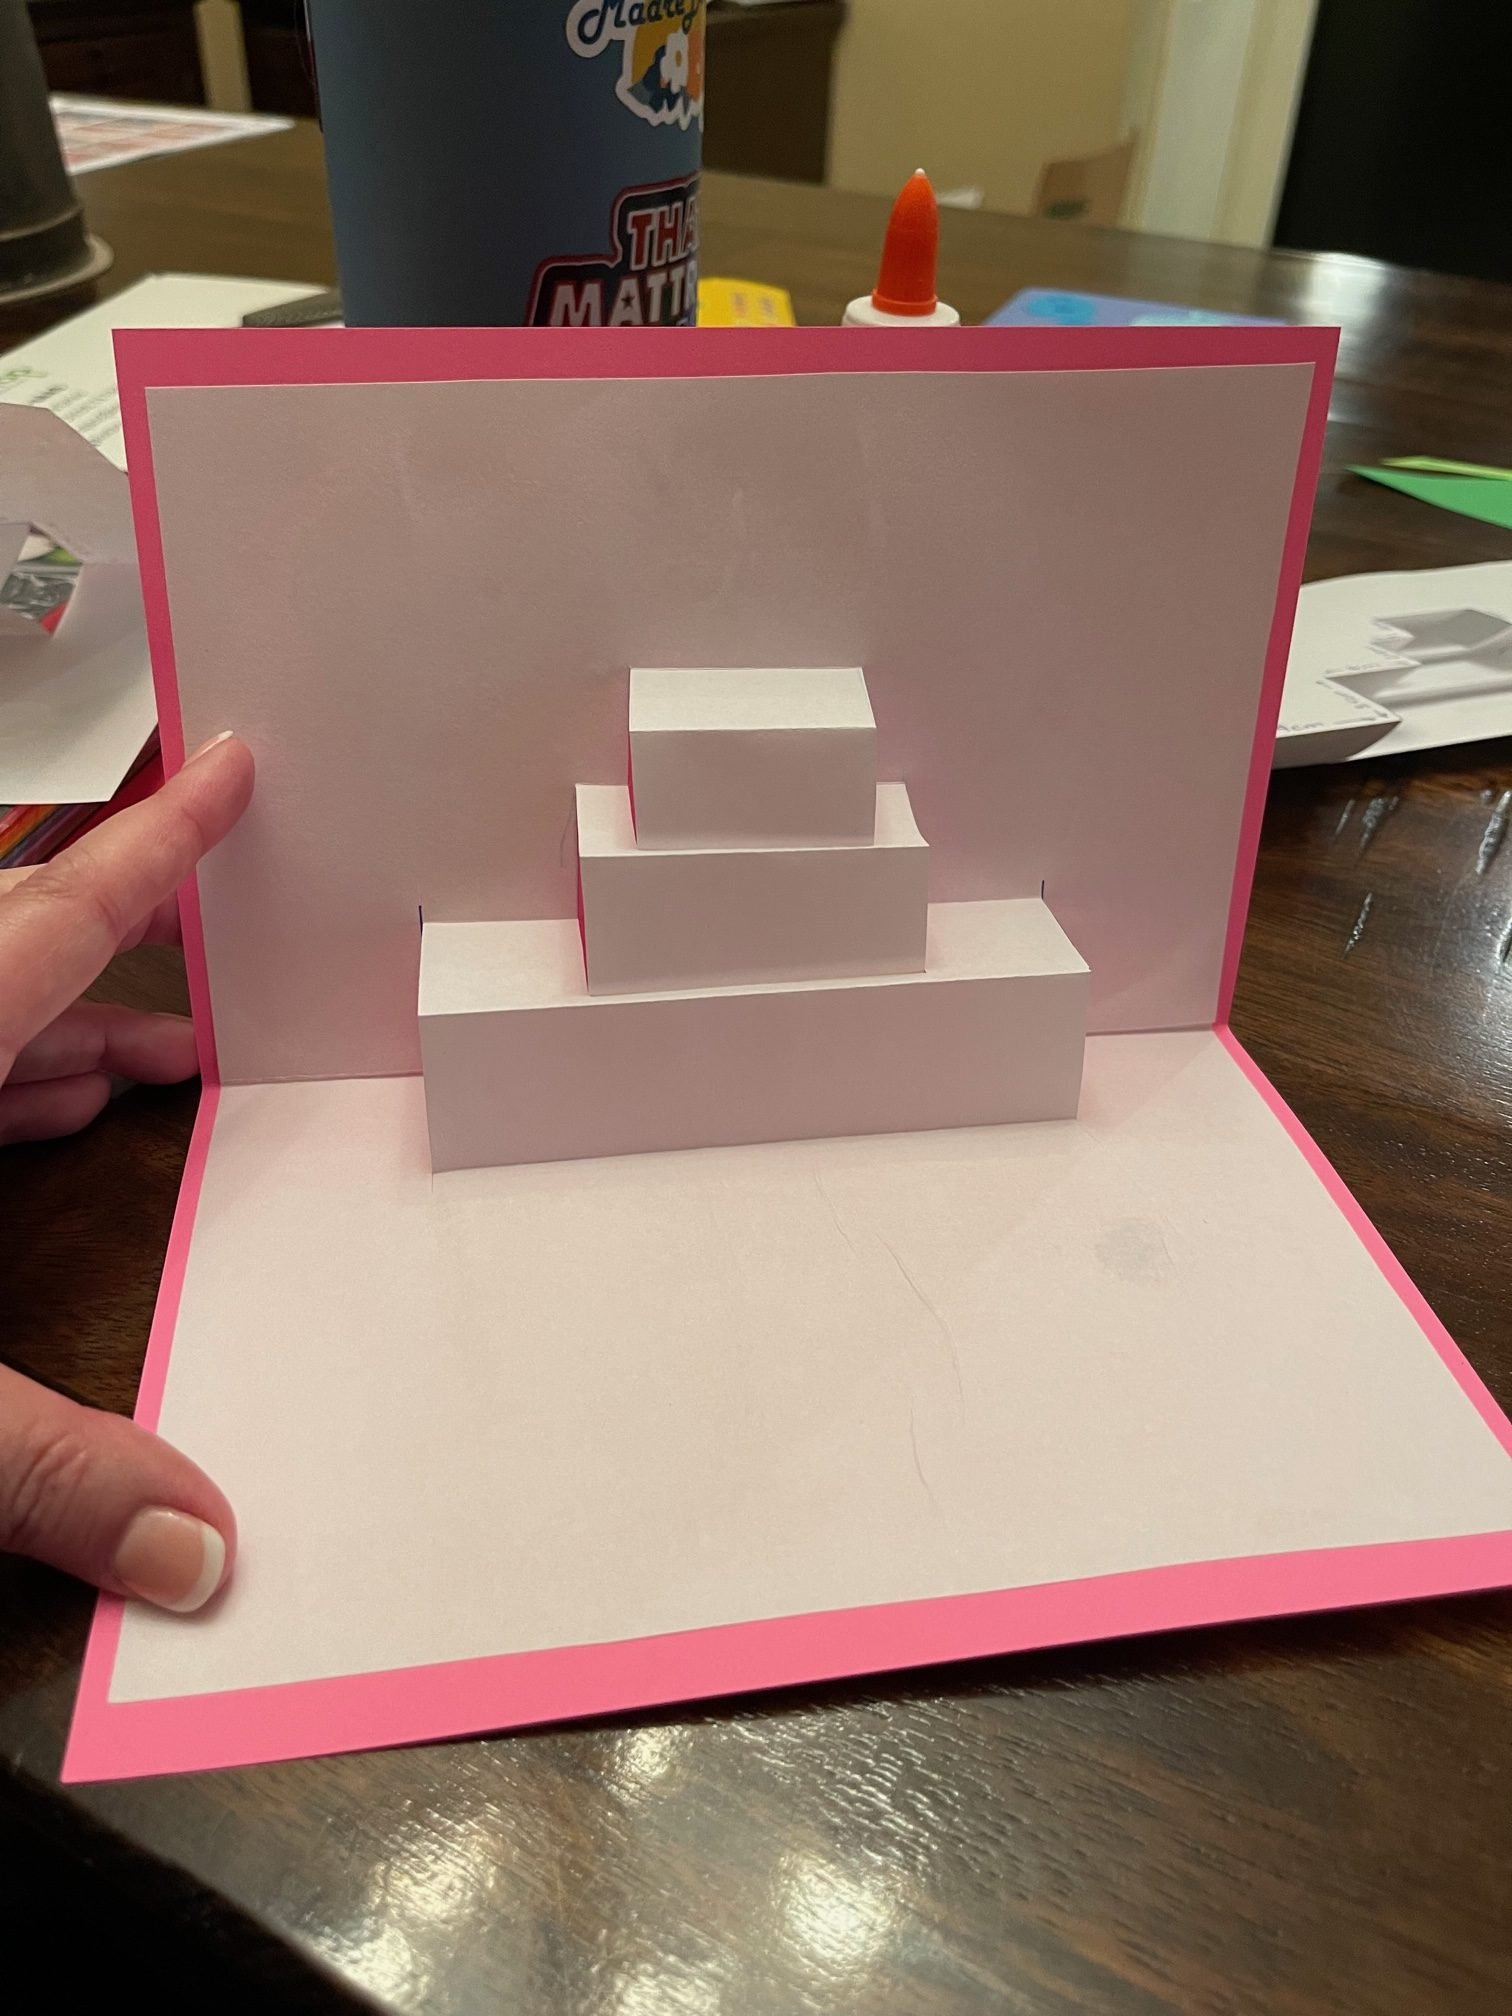 Basic 3-D pop up card before decorations